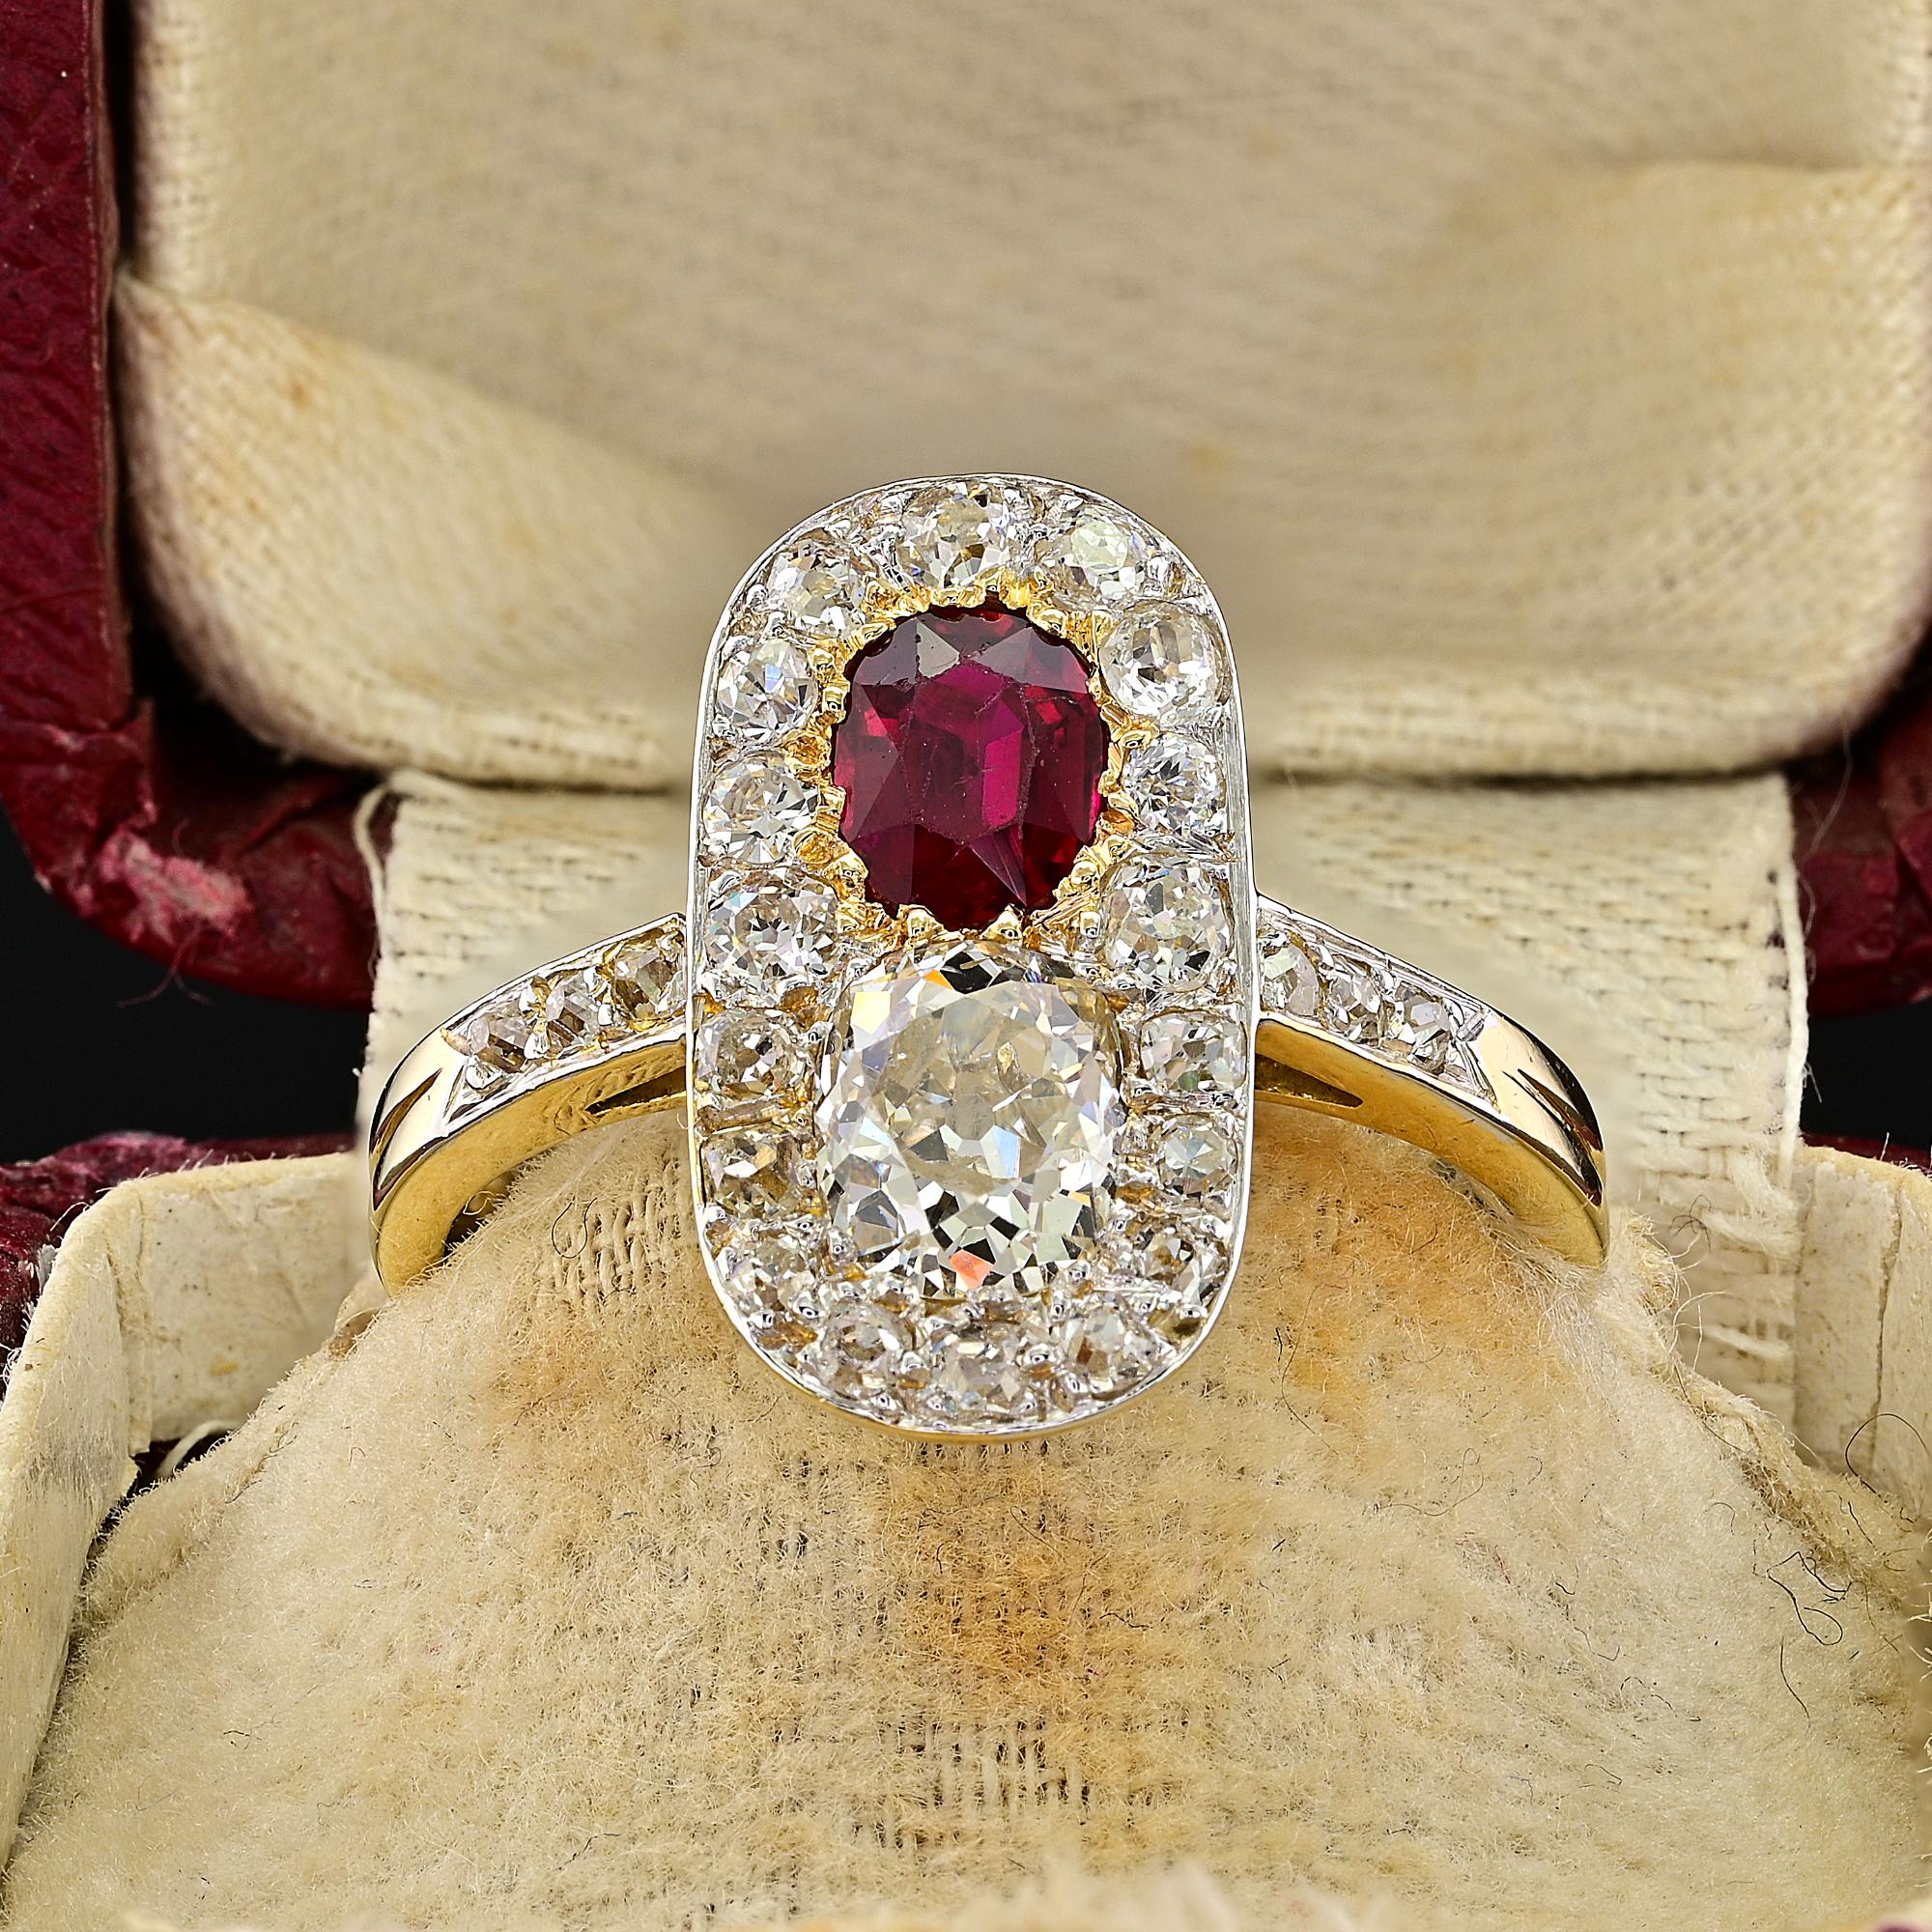 This breathtaking Edwardian ring is 1900/09 circa
Elegantly designed as a flat crown panel, hand crafted of solid 18 Kt gold with Platinum top
French origin, hallmarked
Set on one side with a natural no  heat - untreated natural Ruby of vibrant Red